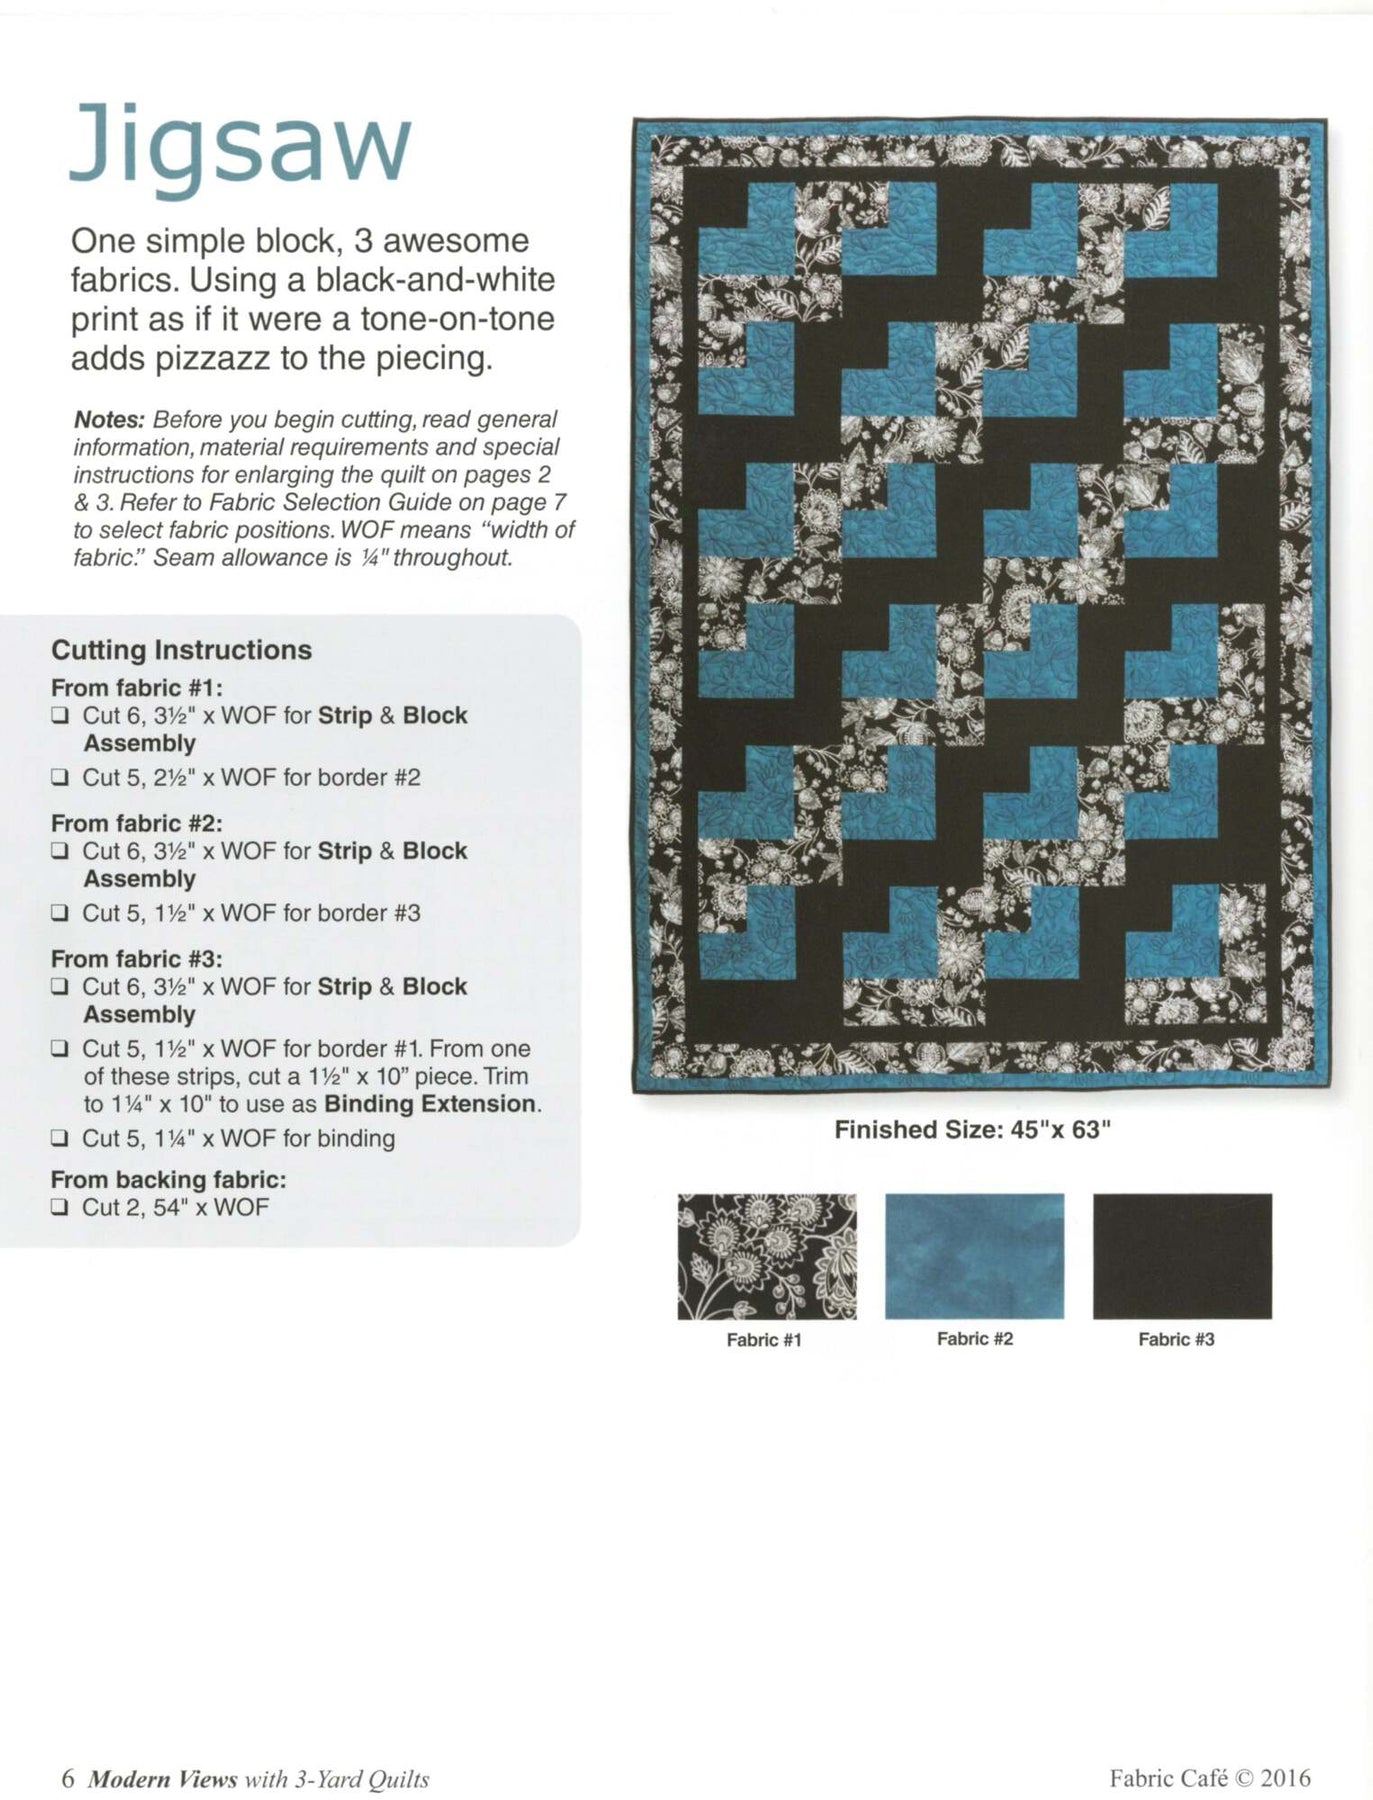 Fast & Fun 3-Yard Quilts Booklet by Fabric Cafe/Donna Robertson  897086000747 - Quilt in a Day Patterns